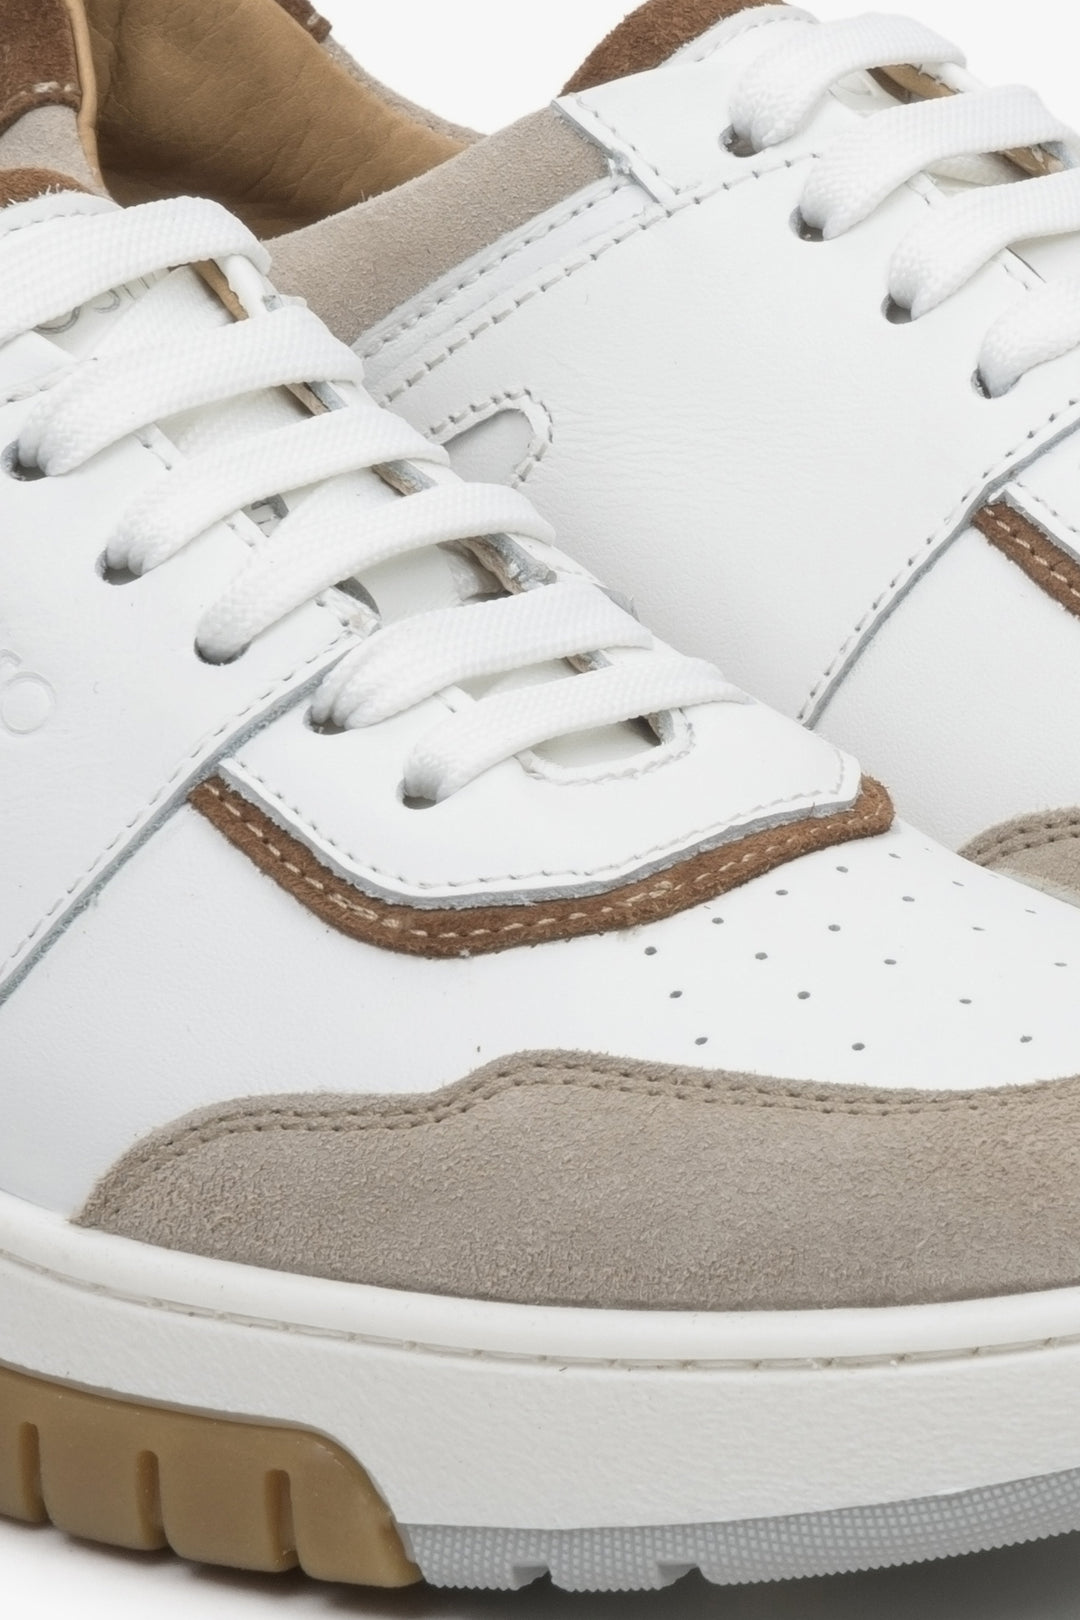 Women's sneakers made of genuine leather and suede in beige and white - close-up on the details.